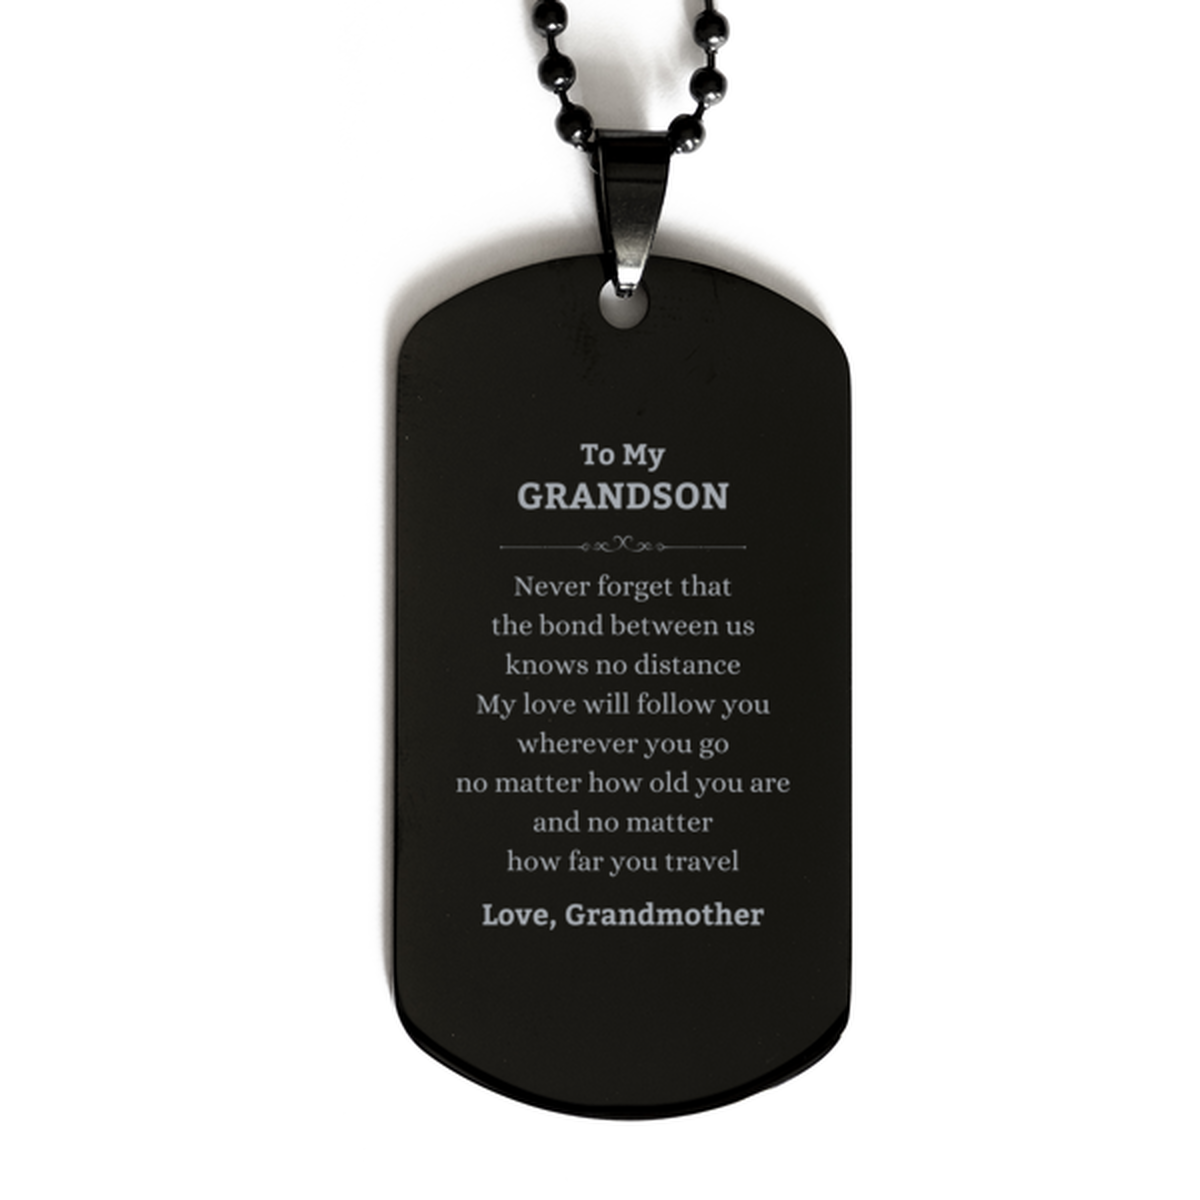 Grandson Birthday Gifts from Grandmother, Adjustable Black Dog Tag for Grandson Christmas Graduation Unique Gifts Grandson Never forget that the bond between us knows no distance. Love, Grandmother